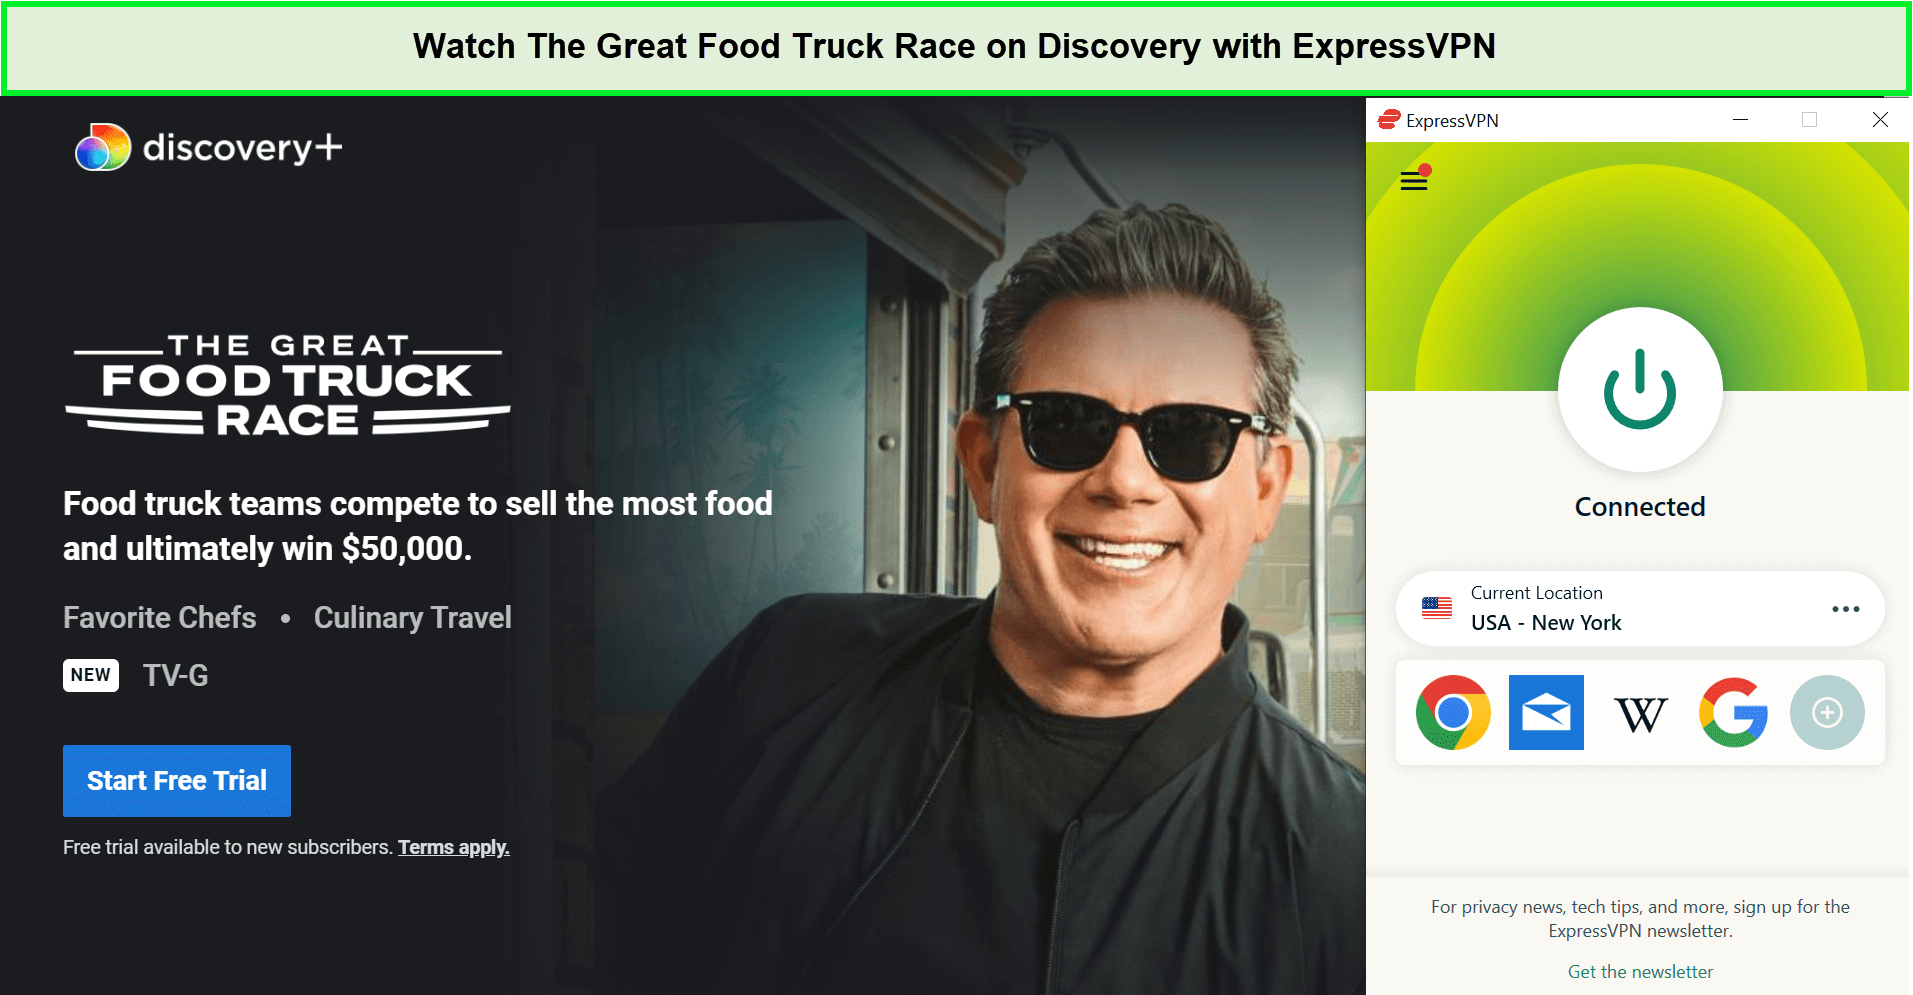 Watch-The-Great-Food-Truck-Race-in-au-on-Discovery-with-ExpressVPN